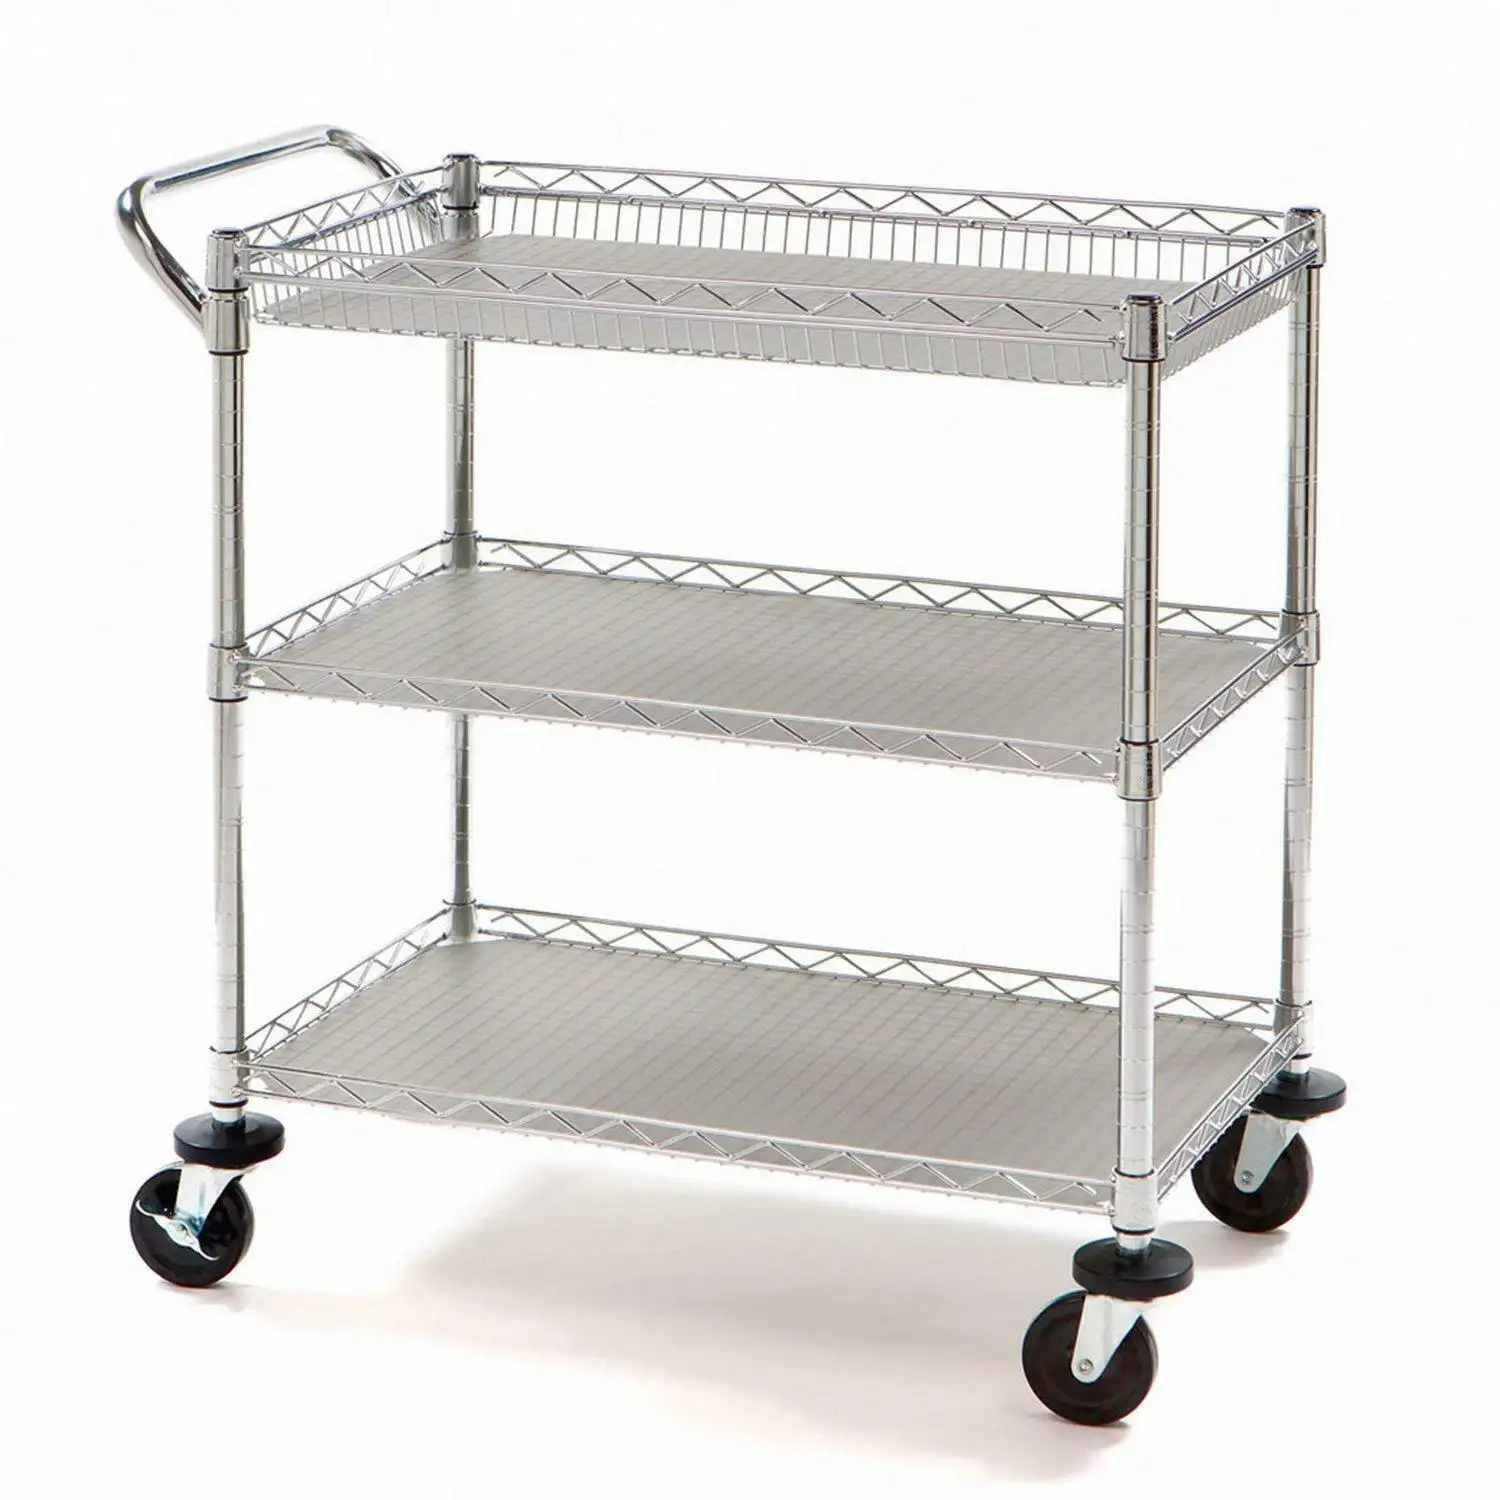 NSF Commercial Grade Industrial Utility Cart Dolly 3 Steel Wire Storage Shelving